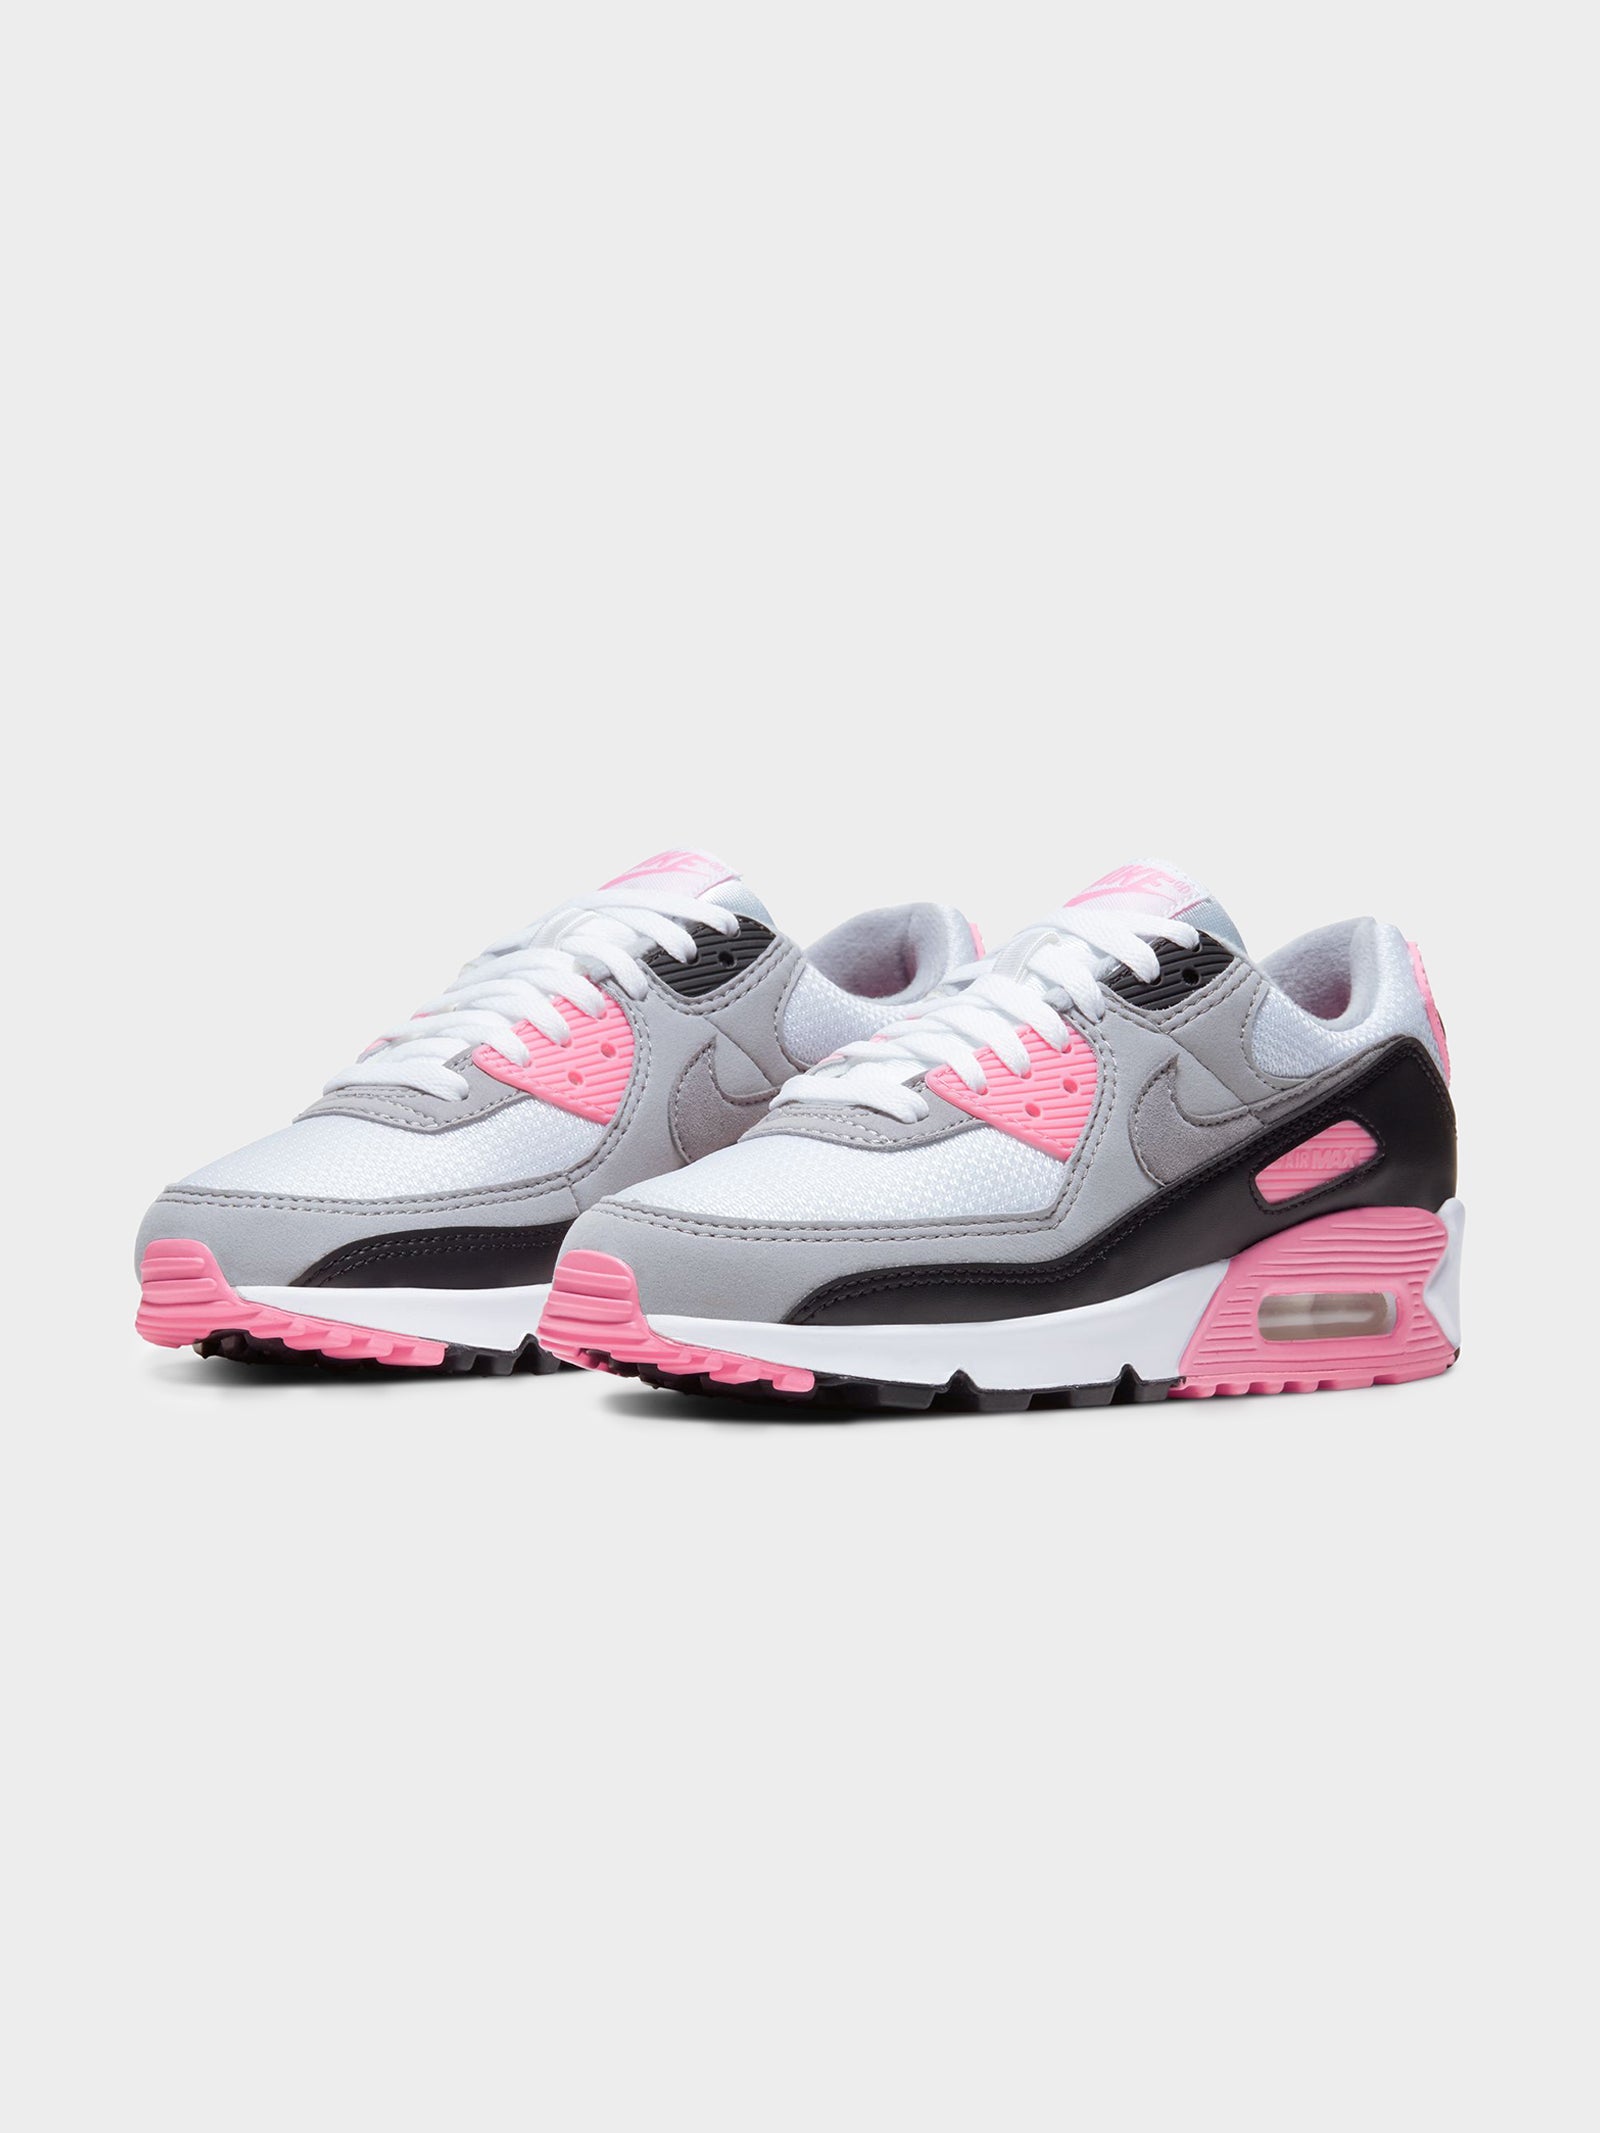 Womens Air Max 90 Sneakers in White, Grey & Rose Pink